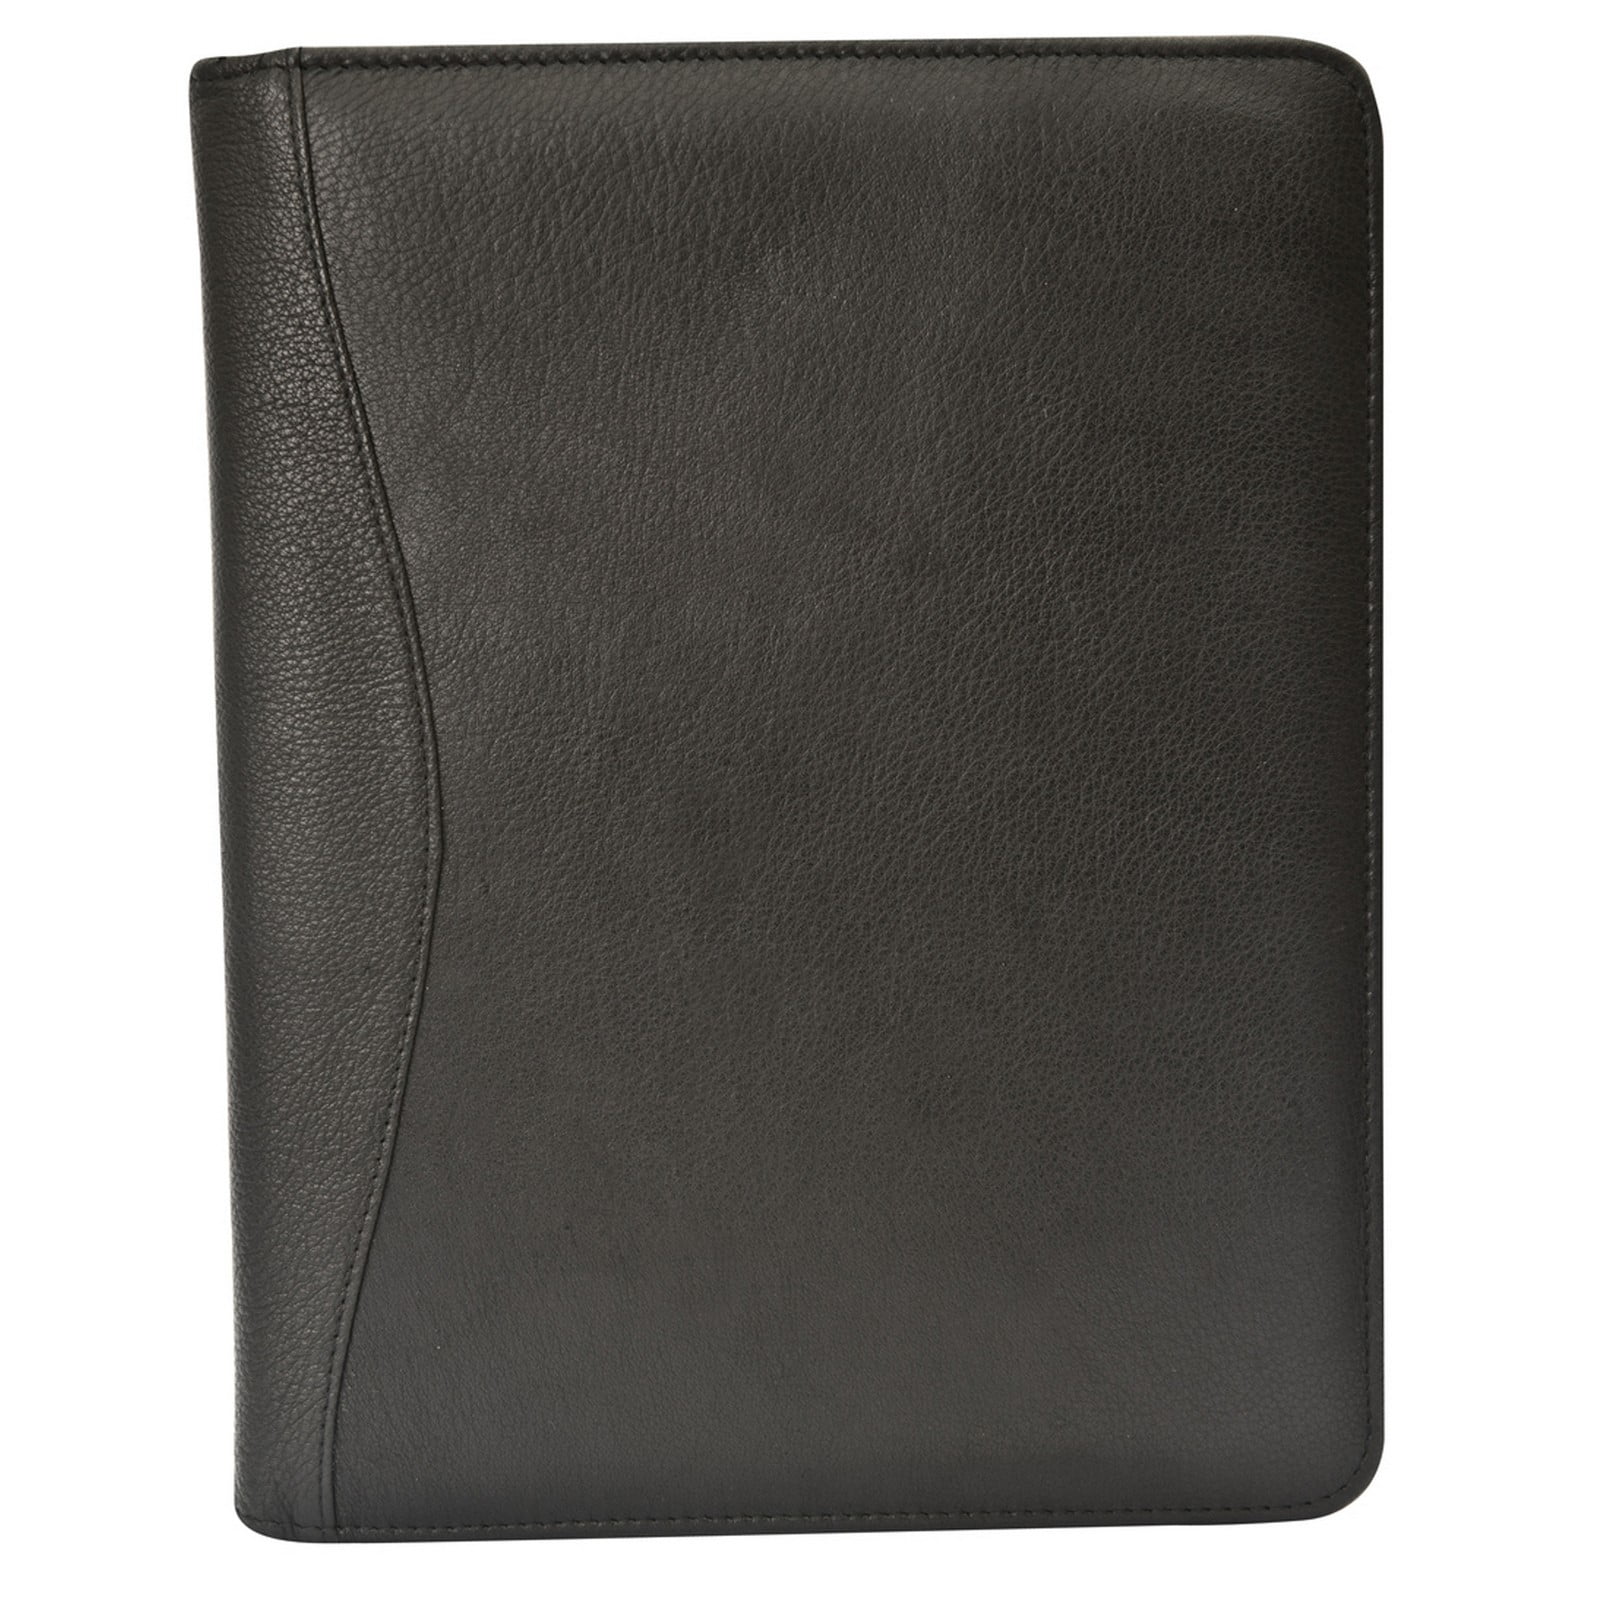 Canyon Outback Leather Red Rock Leather Meeting Folder - Black ...